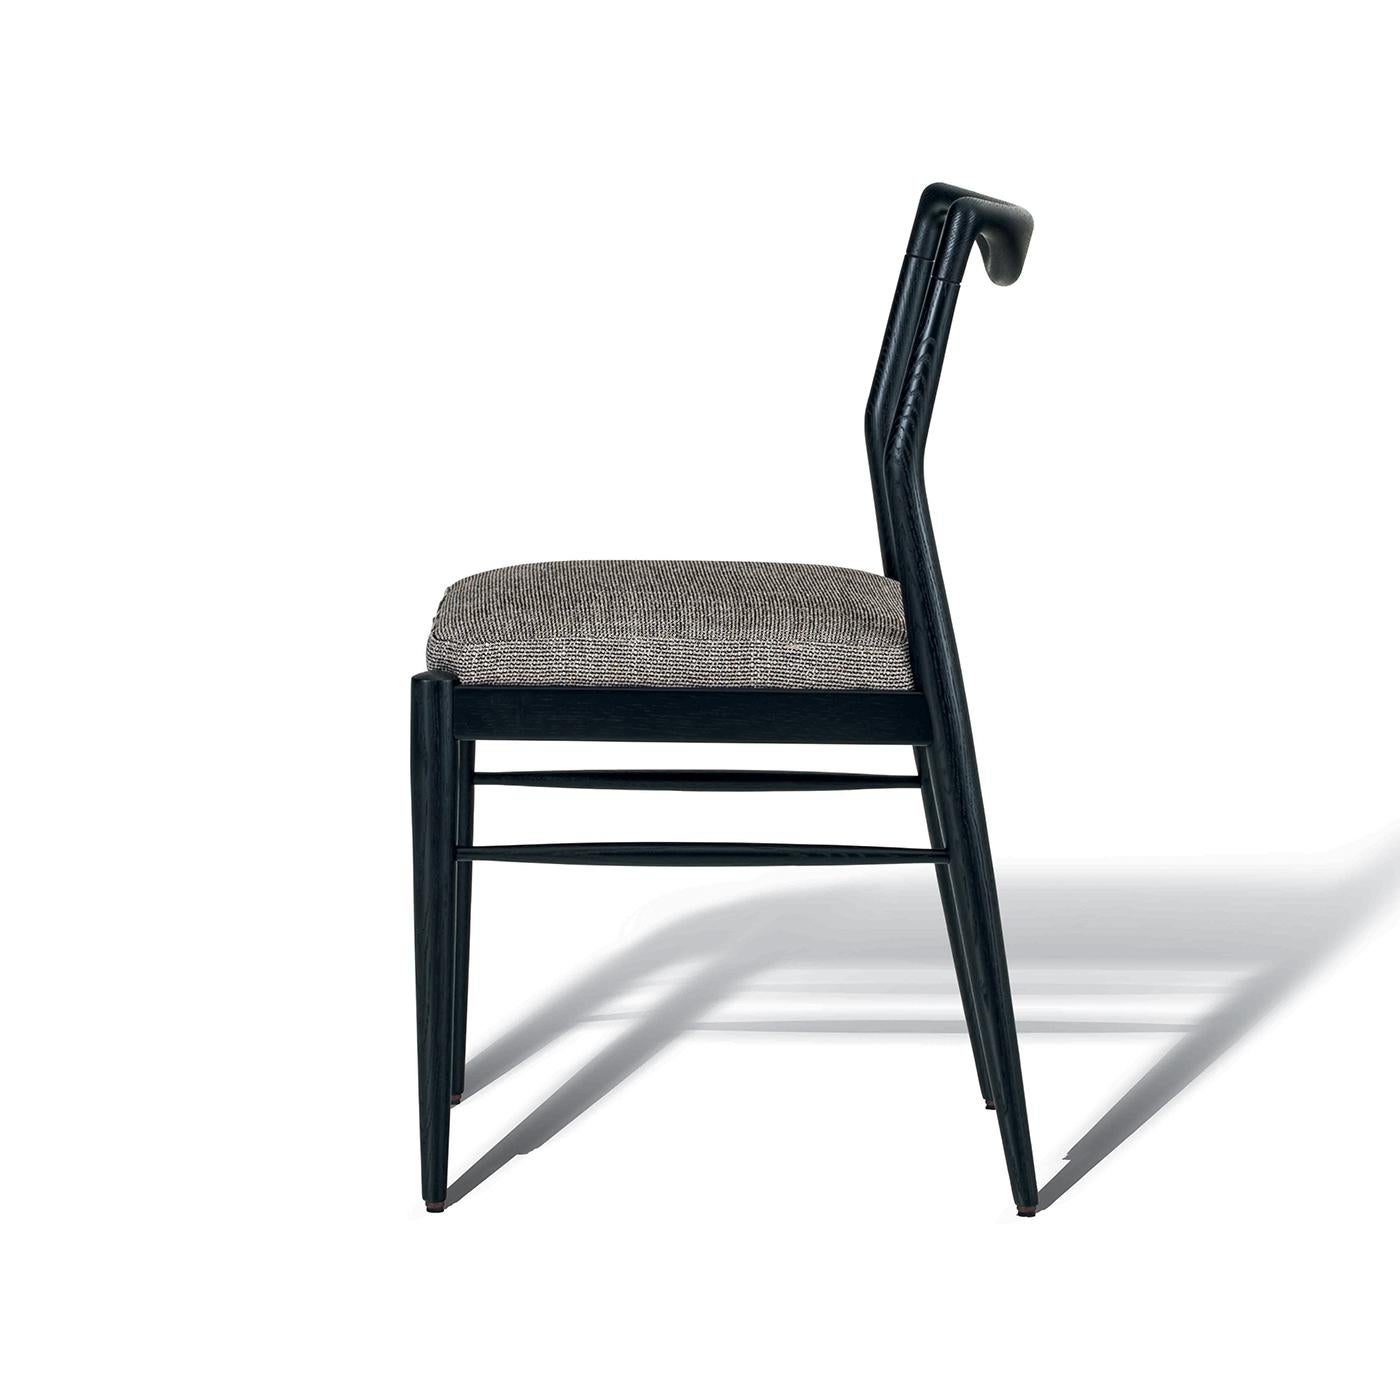 Modern and elegant, this chair features a solid wooden frame made of natural oak, ebonized oak or sucupira. The seat is characterized by a high density padded wood panel structure and by non-removable fabric or leather upholstery. This item can be